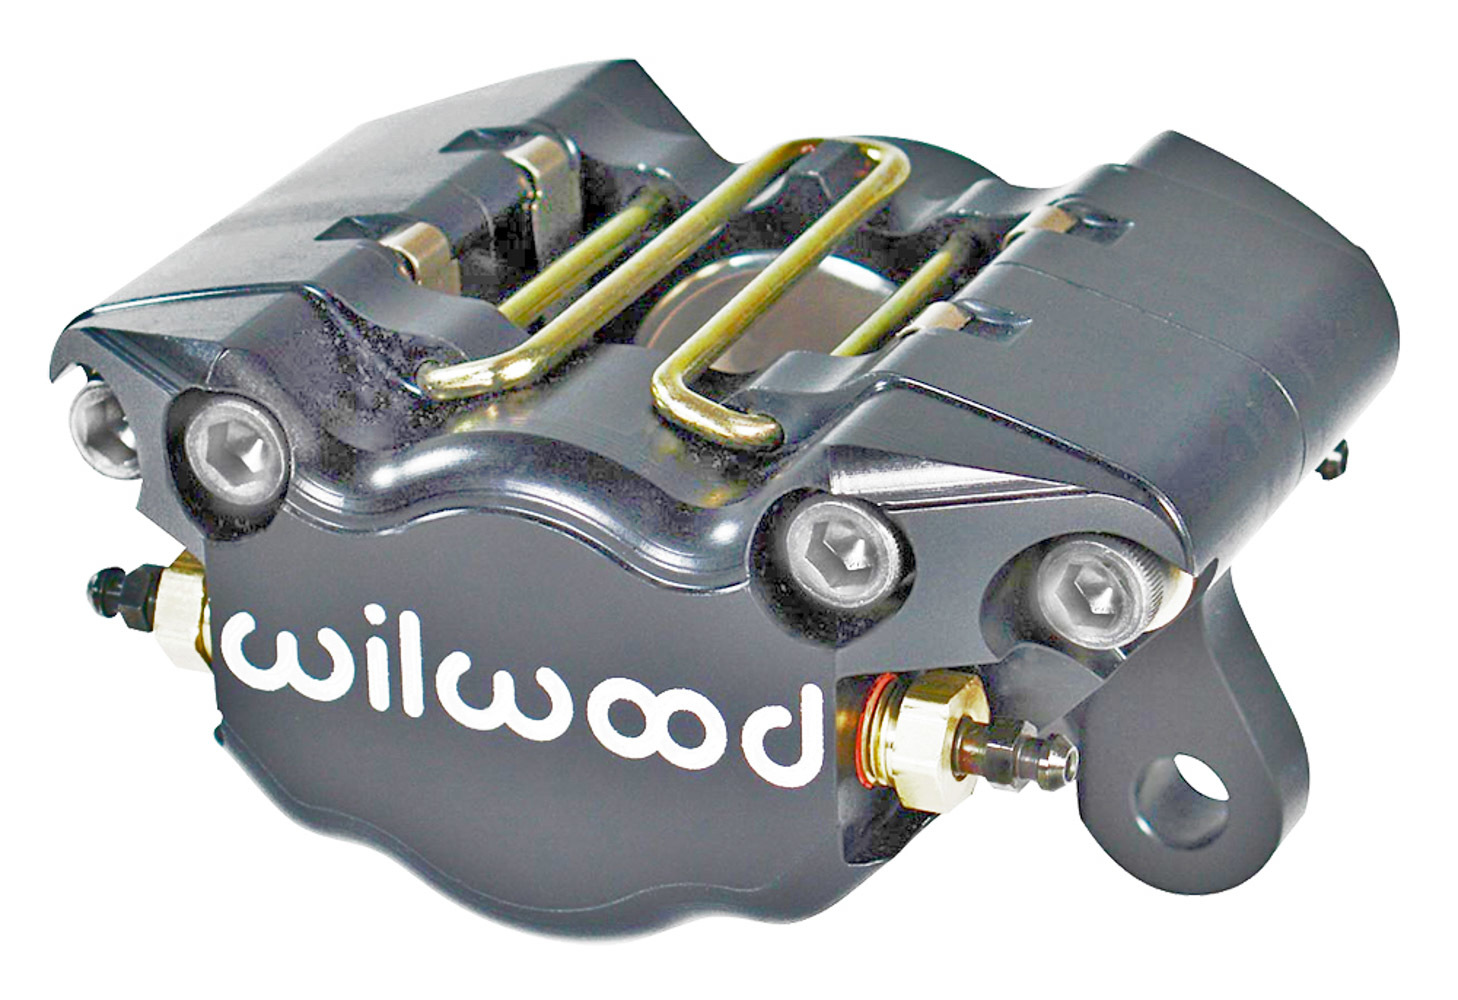 Brake Caliper - Dynapro - 2 Piston - Billet Aluminum - Gray Anodized - 13.000 in OD x 0.380 in Thick Rotor - 3.750 in Lug Mount - Each